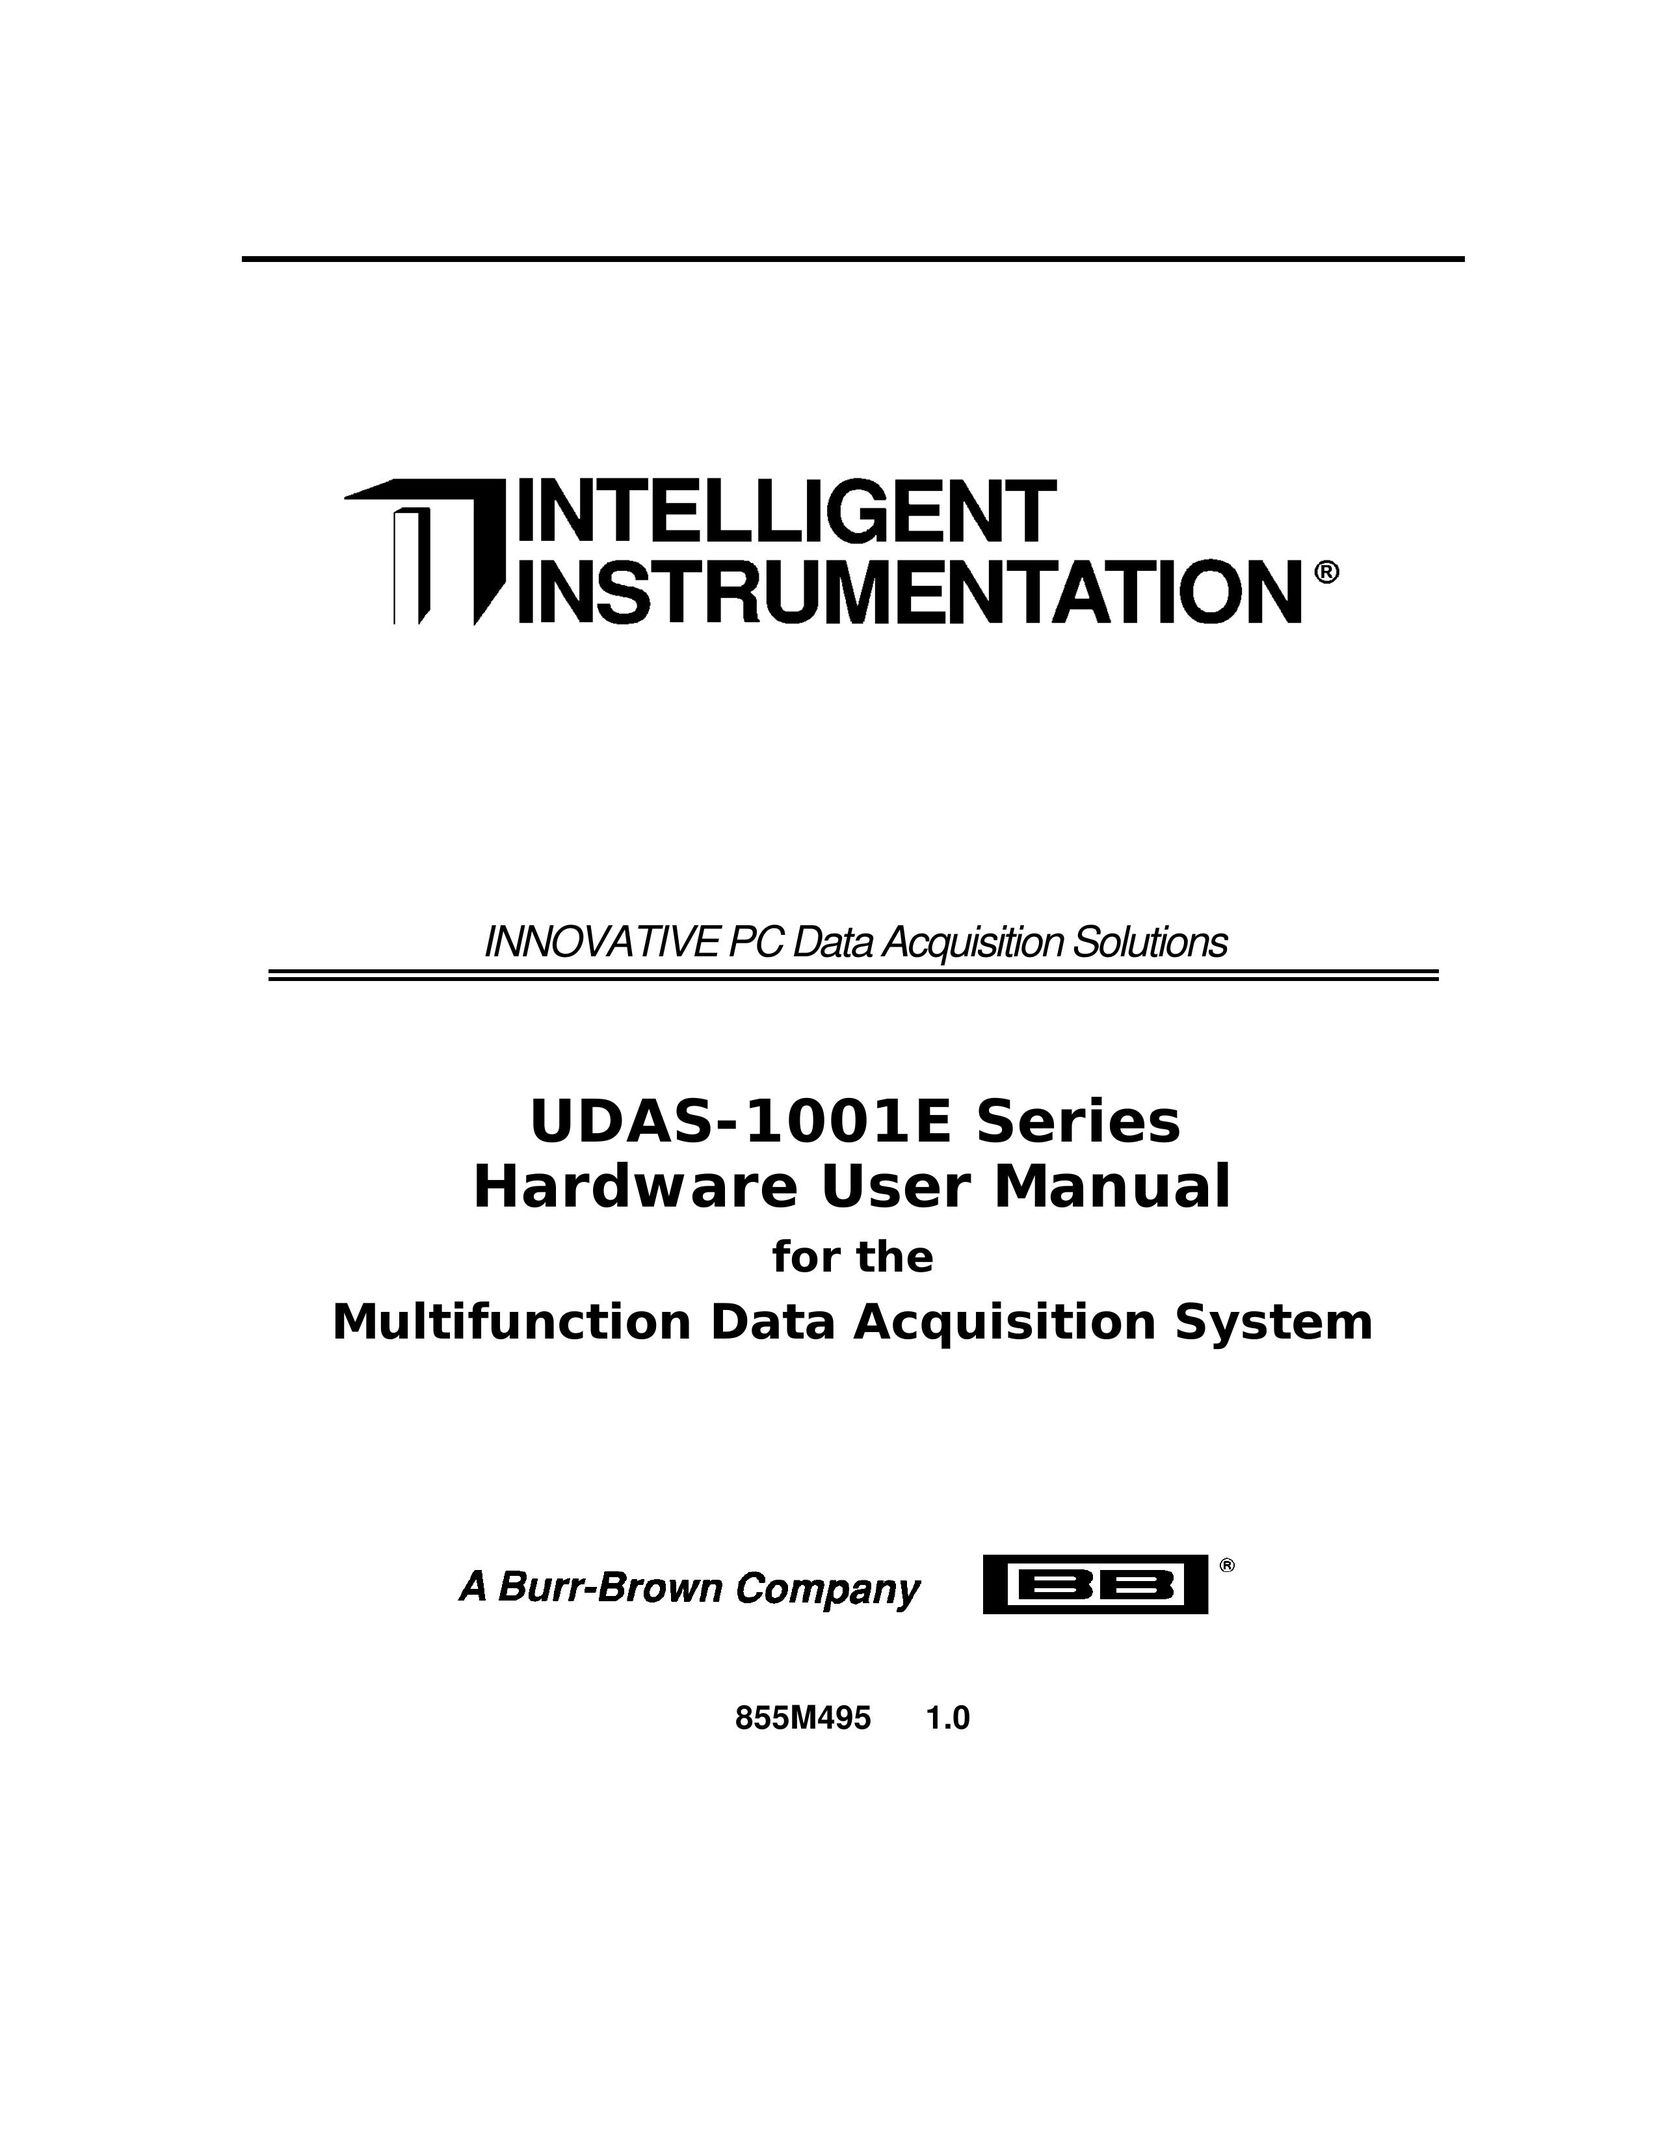 Intelligent Motion Systems UDAS-1001E Computer Hardware User Manual